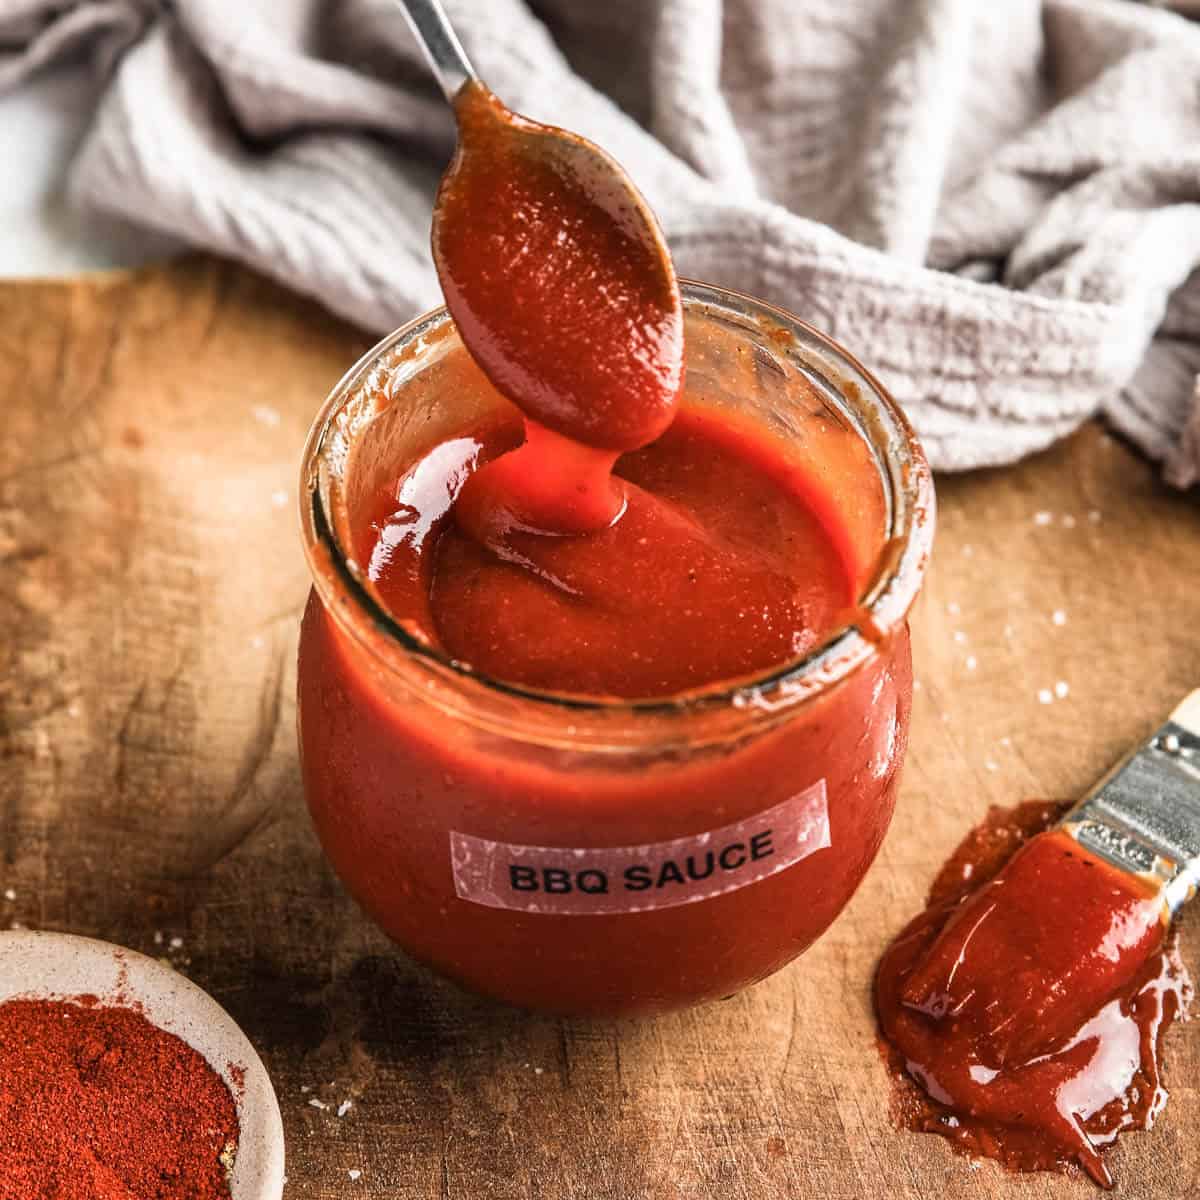 an overhead view of bbq sauce in a small glass jar with a silver spoon lifted above the glass to show the consistency of the bbq sauce.